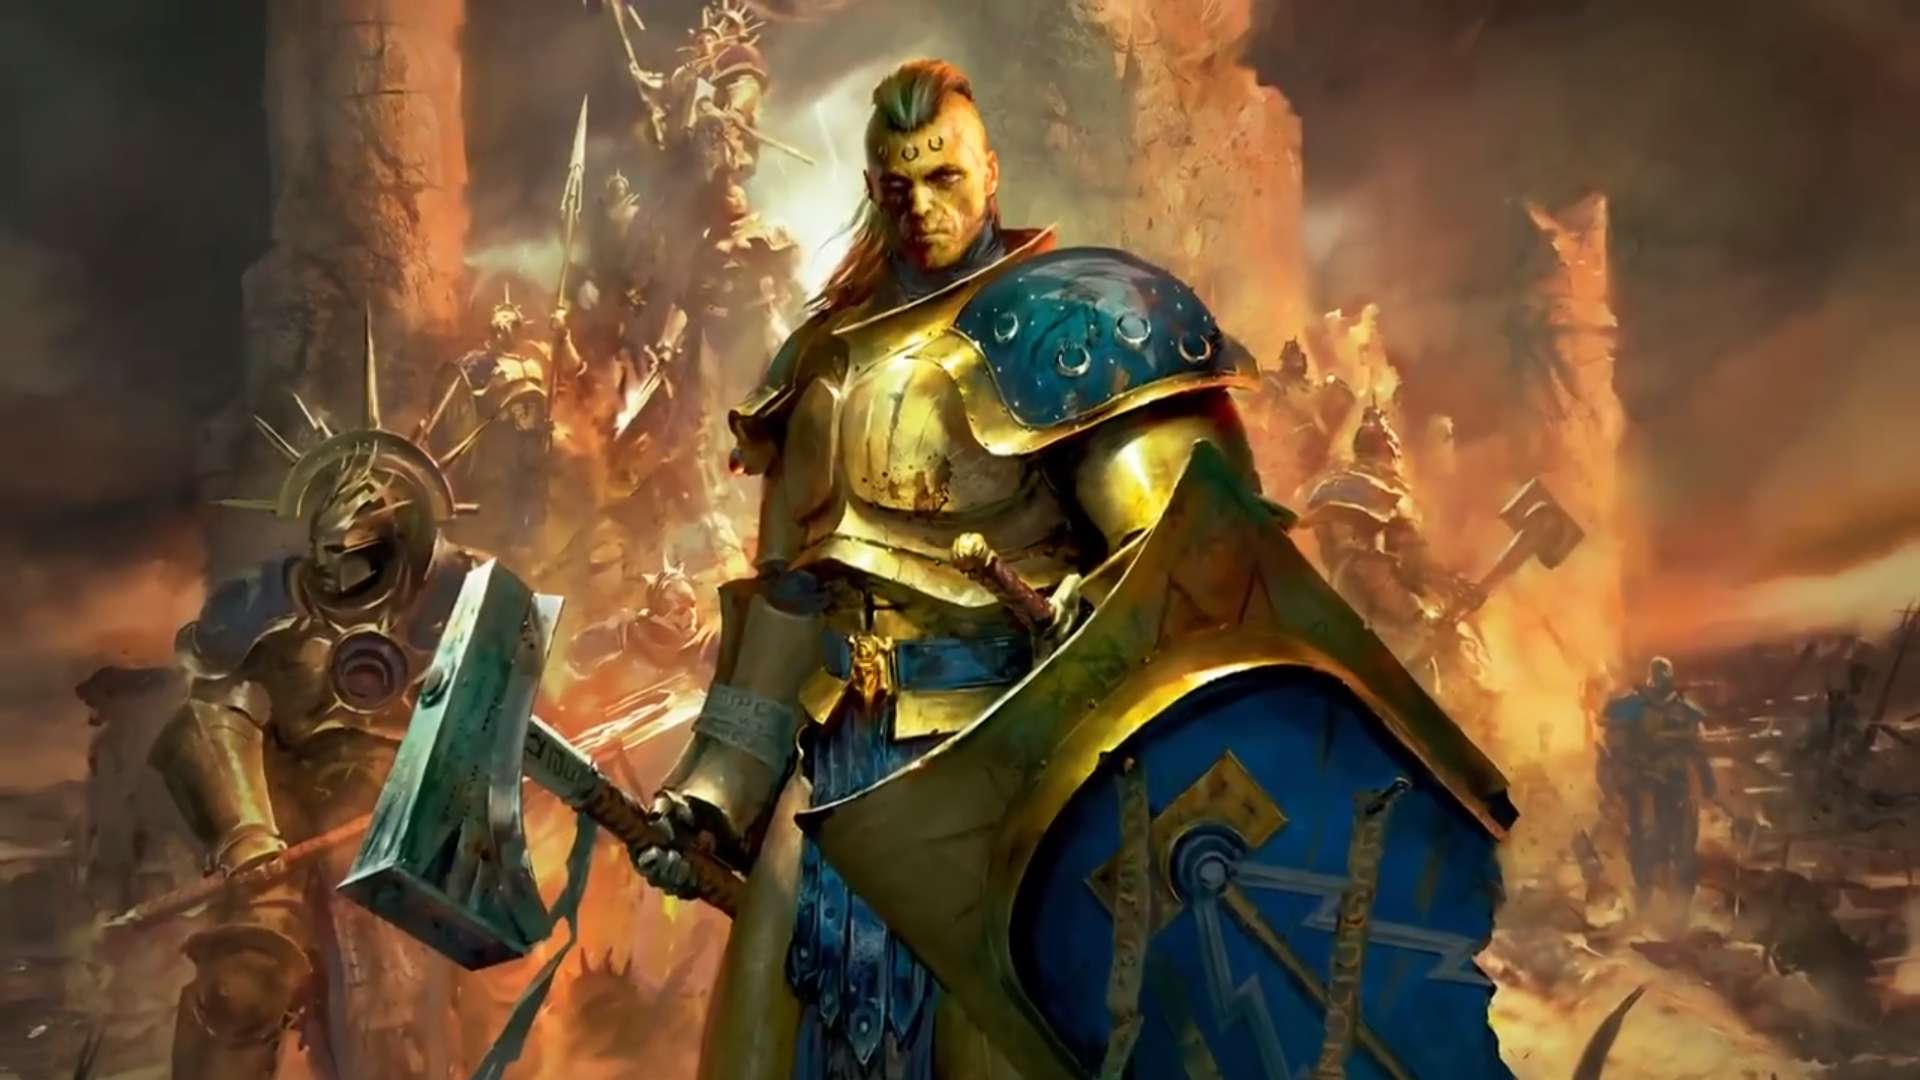 Image for Warhammer Underworlds: Direchasm brings two new factions to the miniatures board